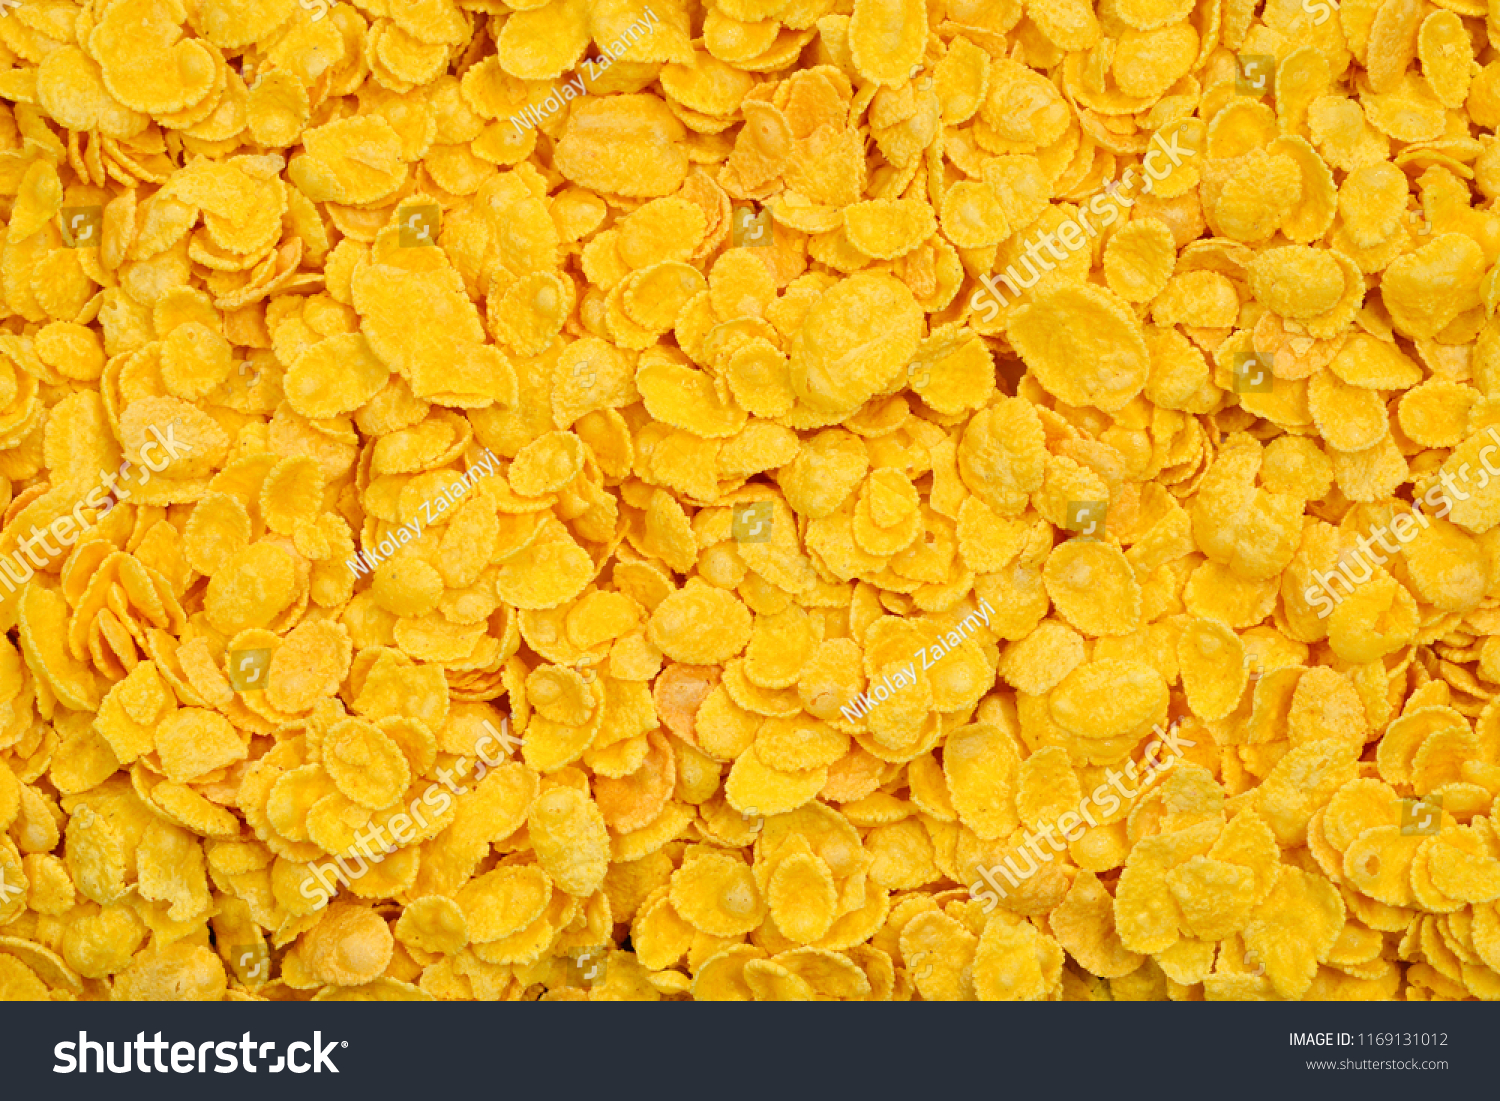 Corn-flakes background and texture. Top view. cornflake cereal box for morning breakfast. #1169131012